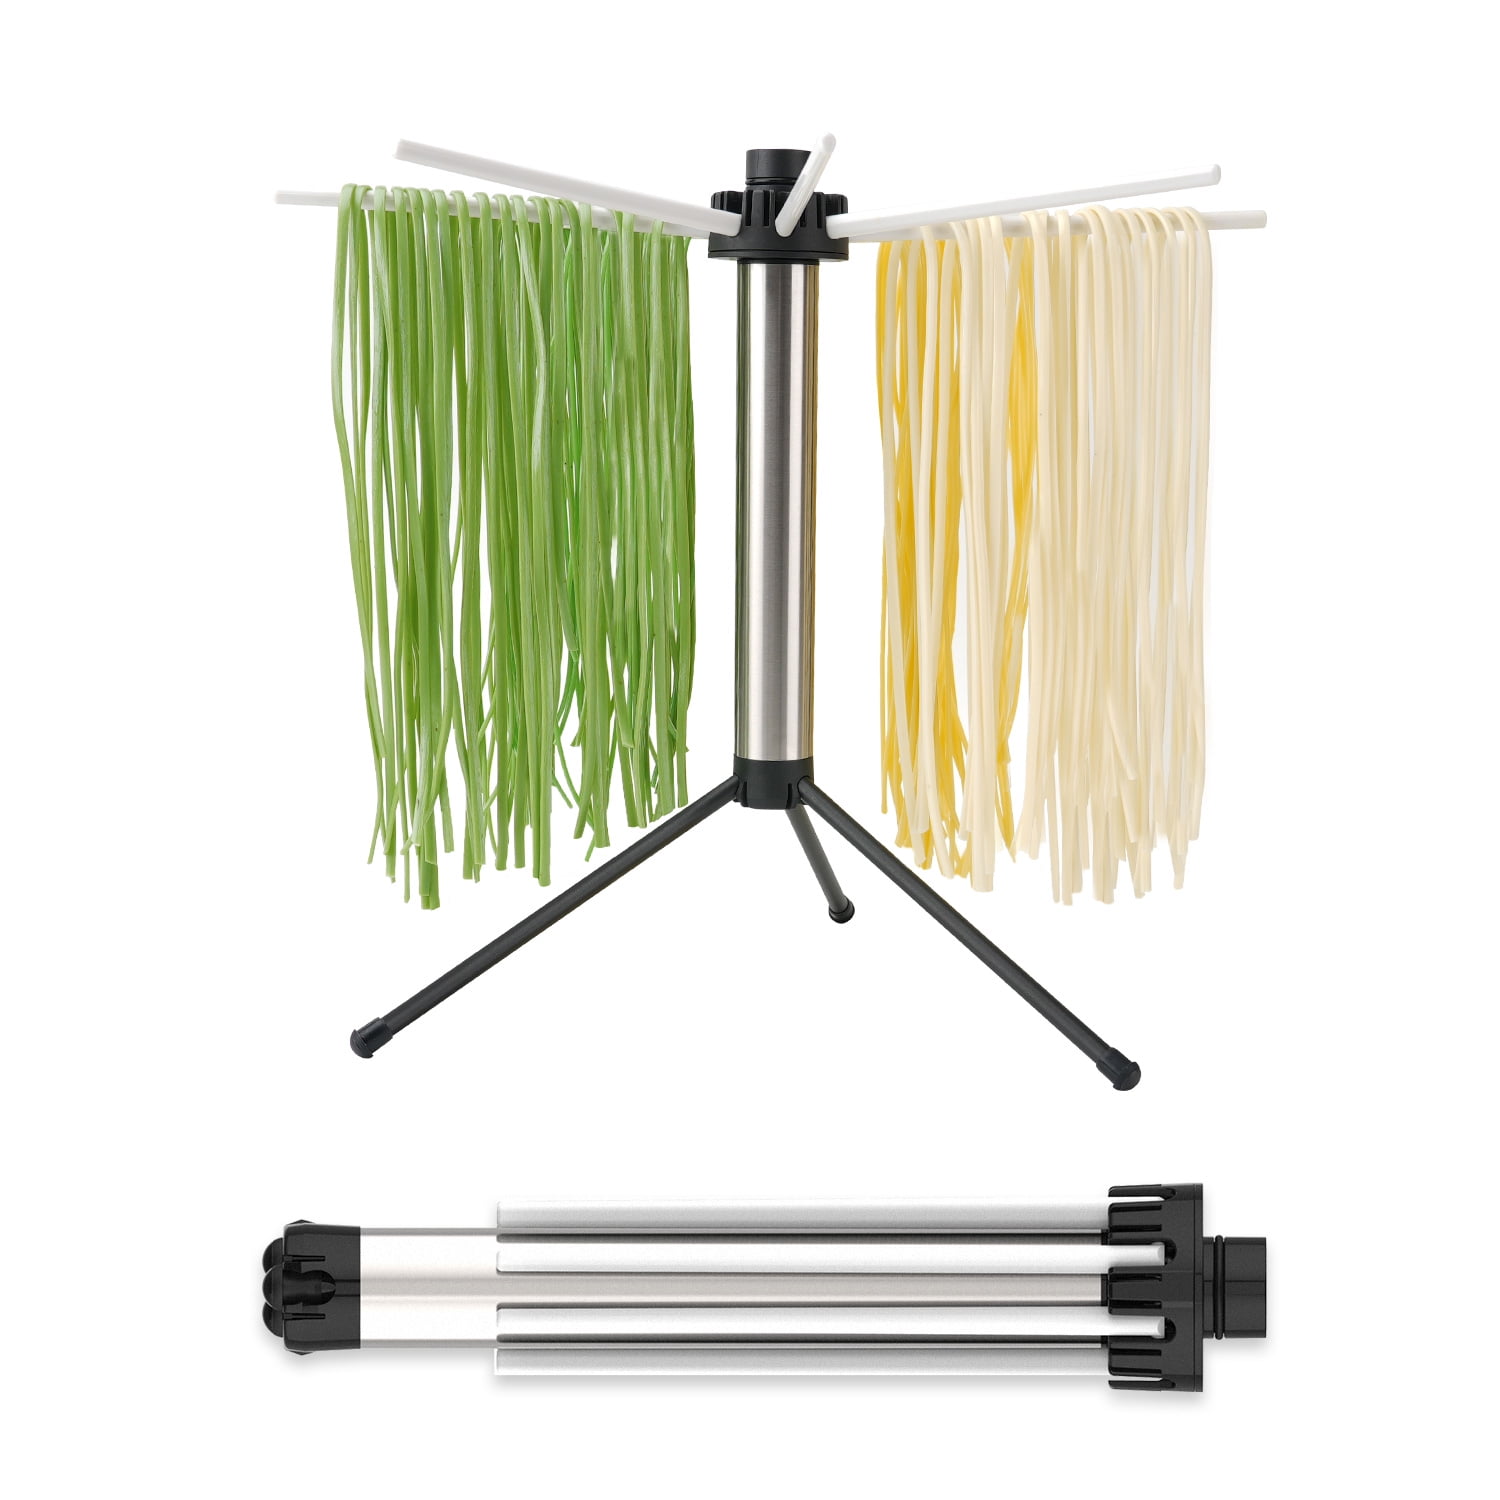 3D file Wooden Collapsible Pasta & Spaghetti Drying Rack 🪵・3D